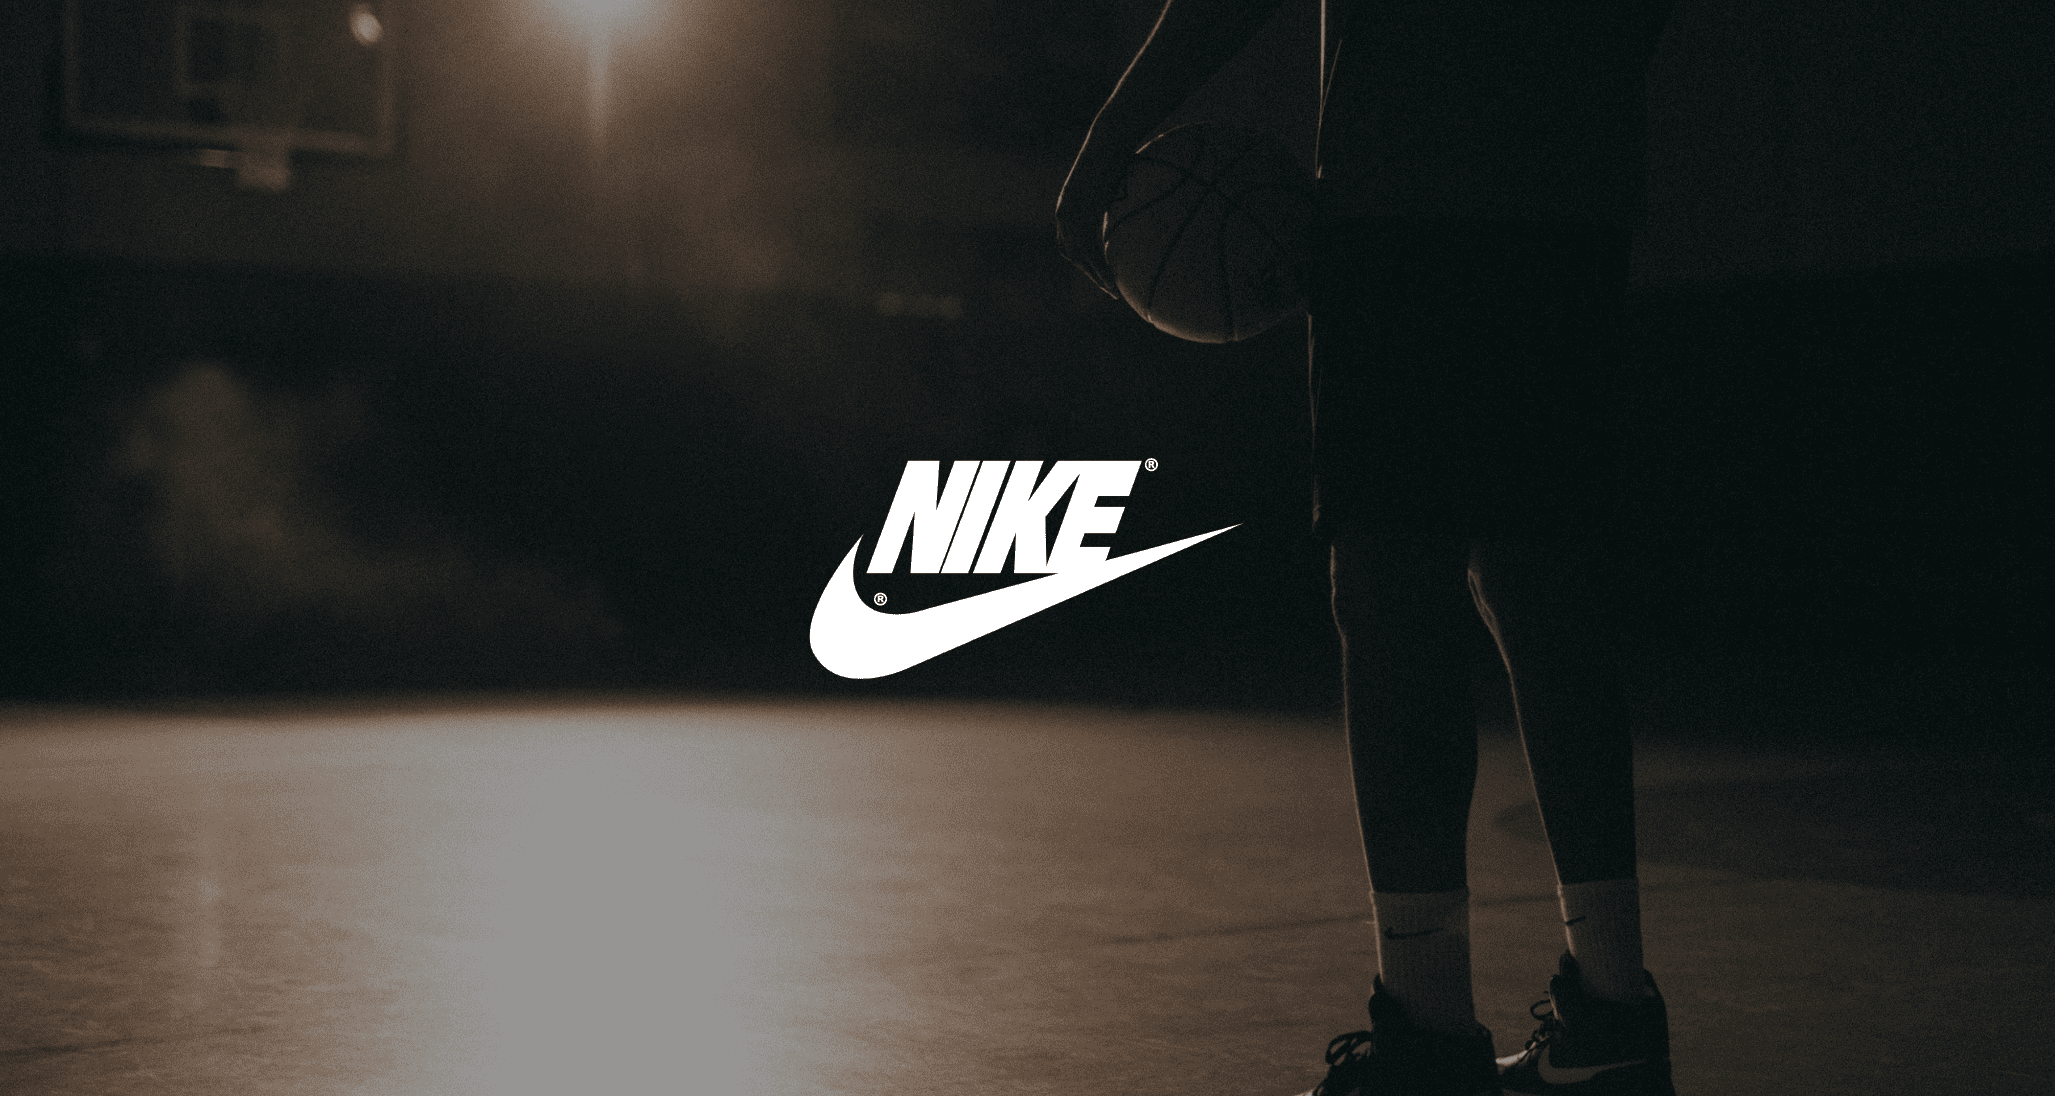 Video Production Services by C&I Studios White Nike logo against a dim view from behind background of a man holding a basketball on a basketball court